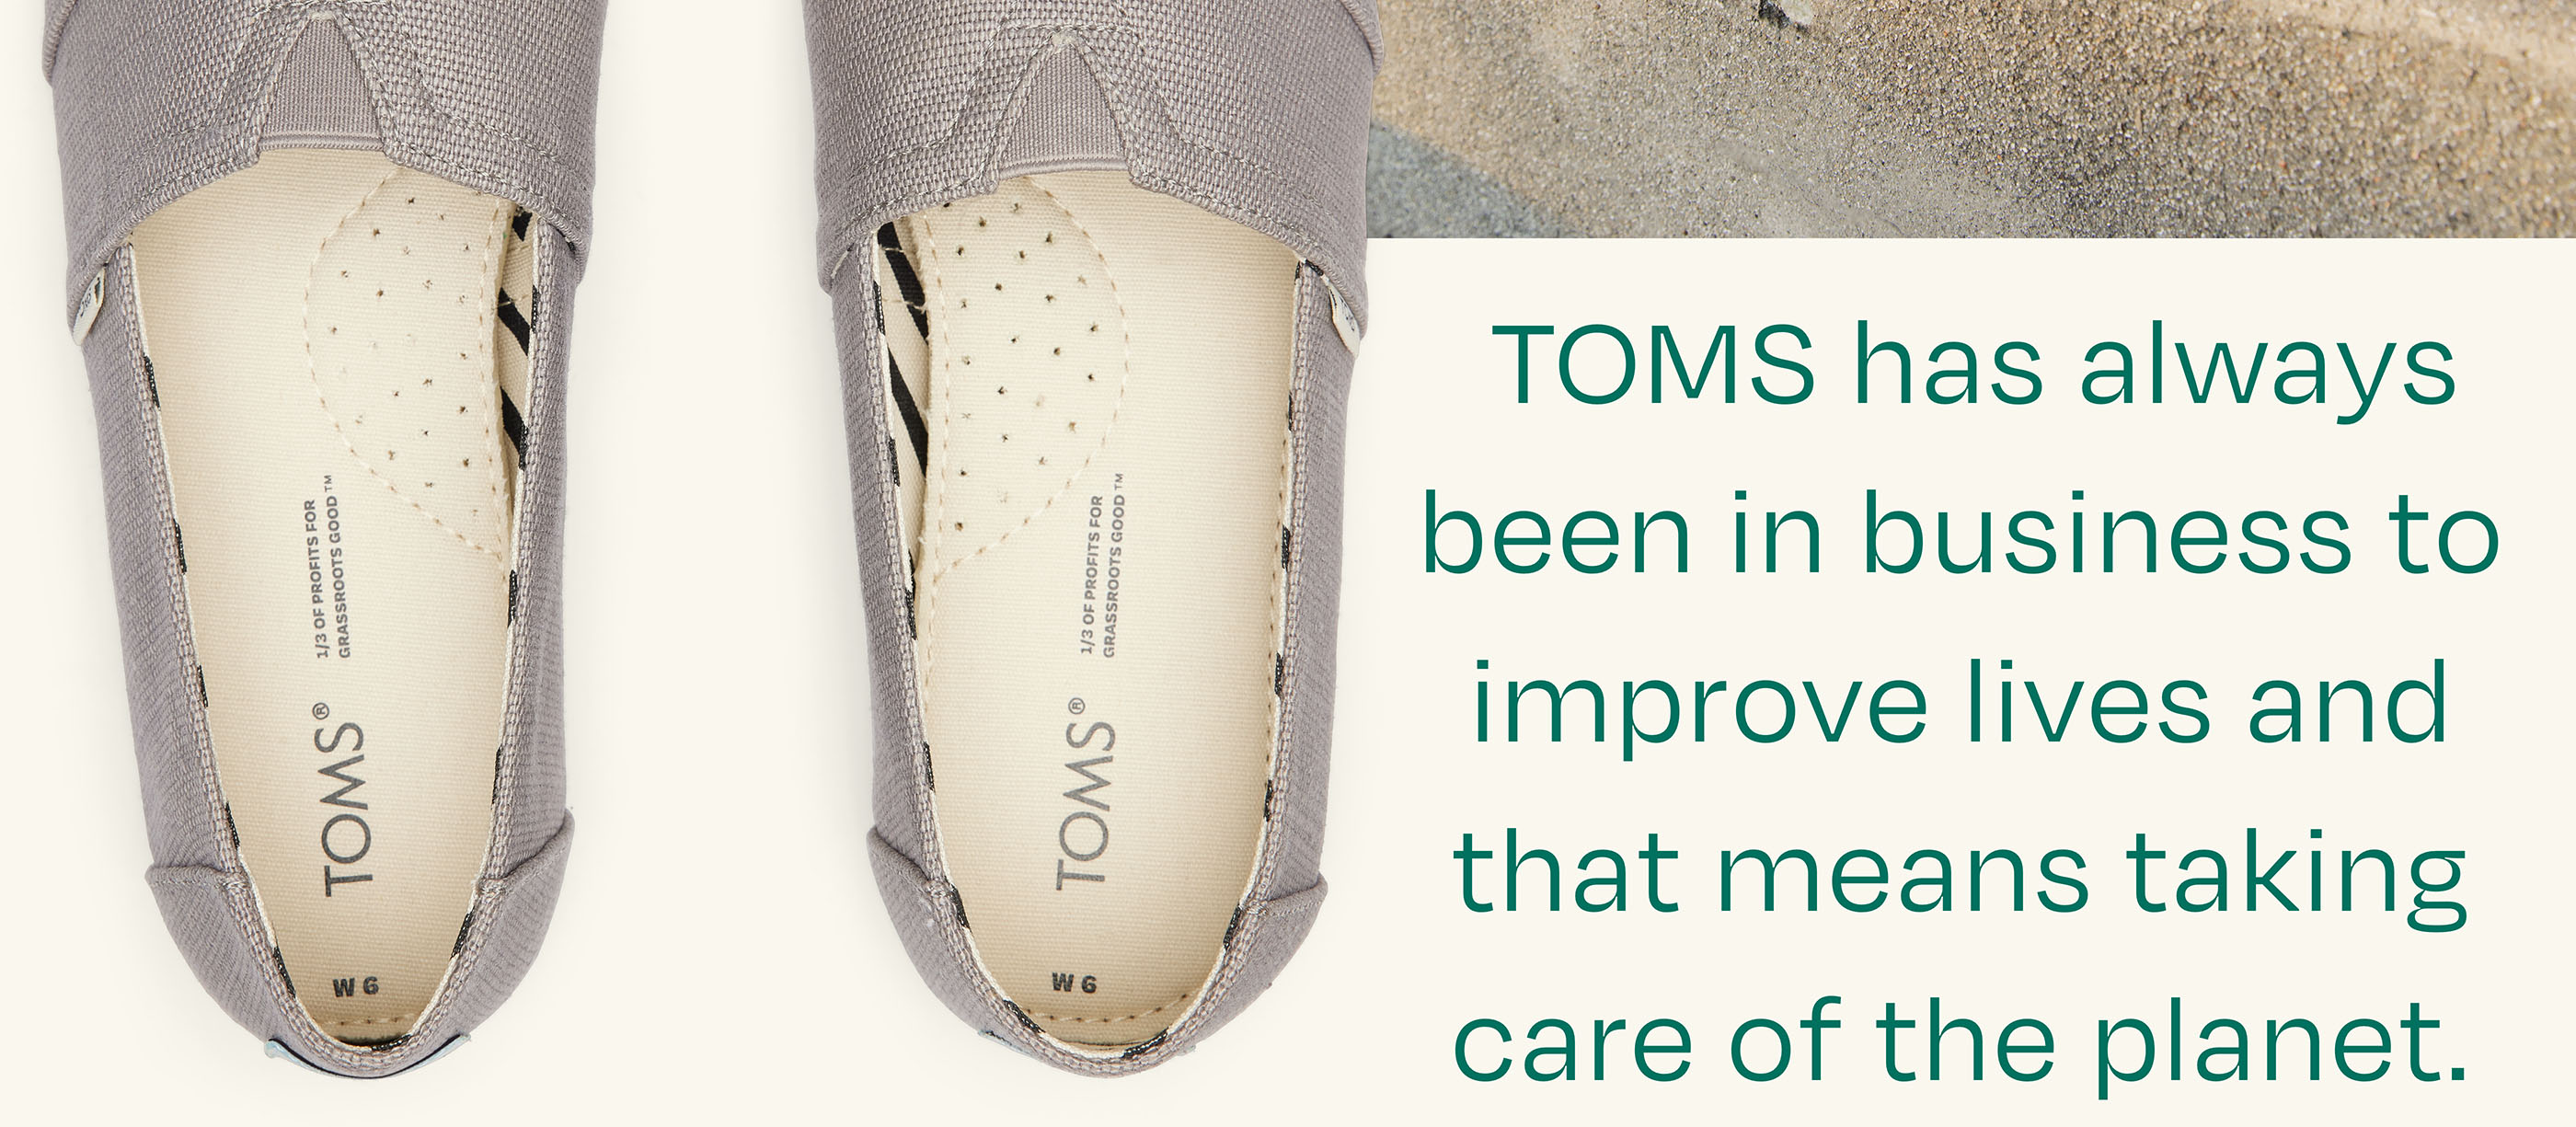 TOMS has always been in business to improve lives and that means taking care of the planet. The Morning Dove Alpargata Heritage Canvas shown.